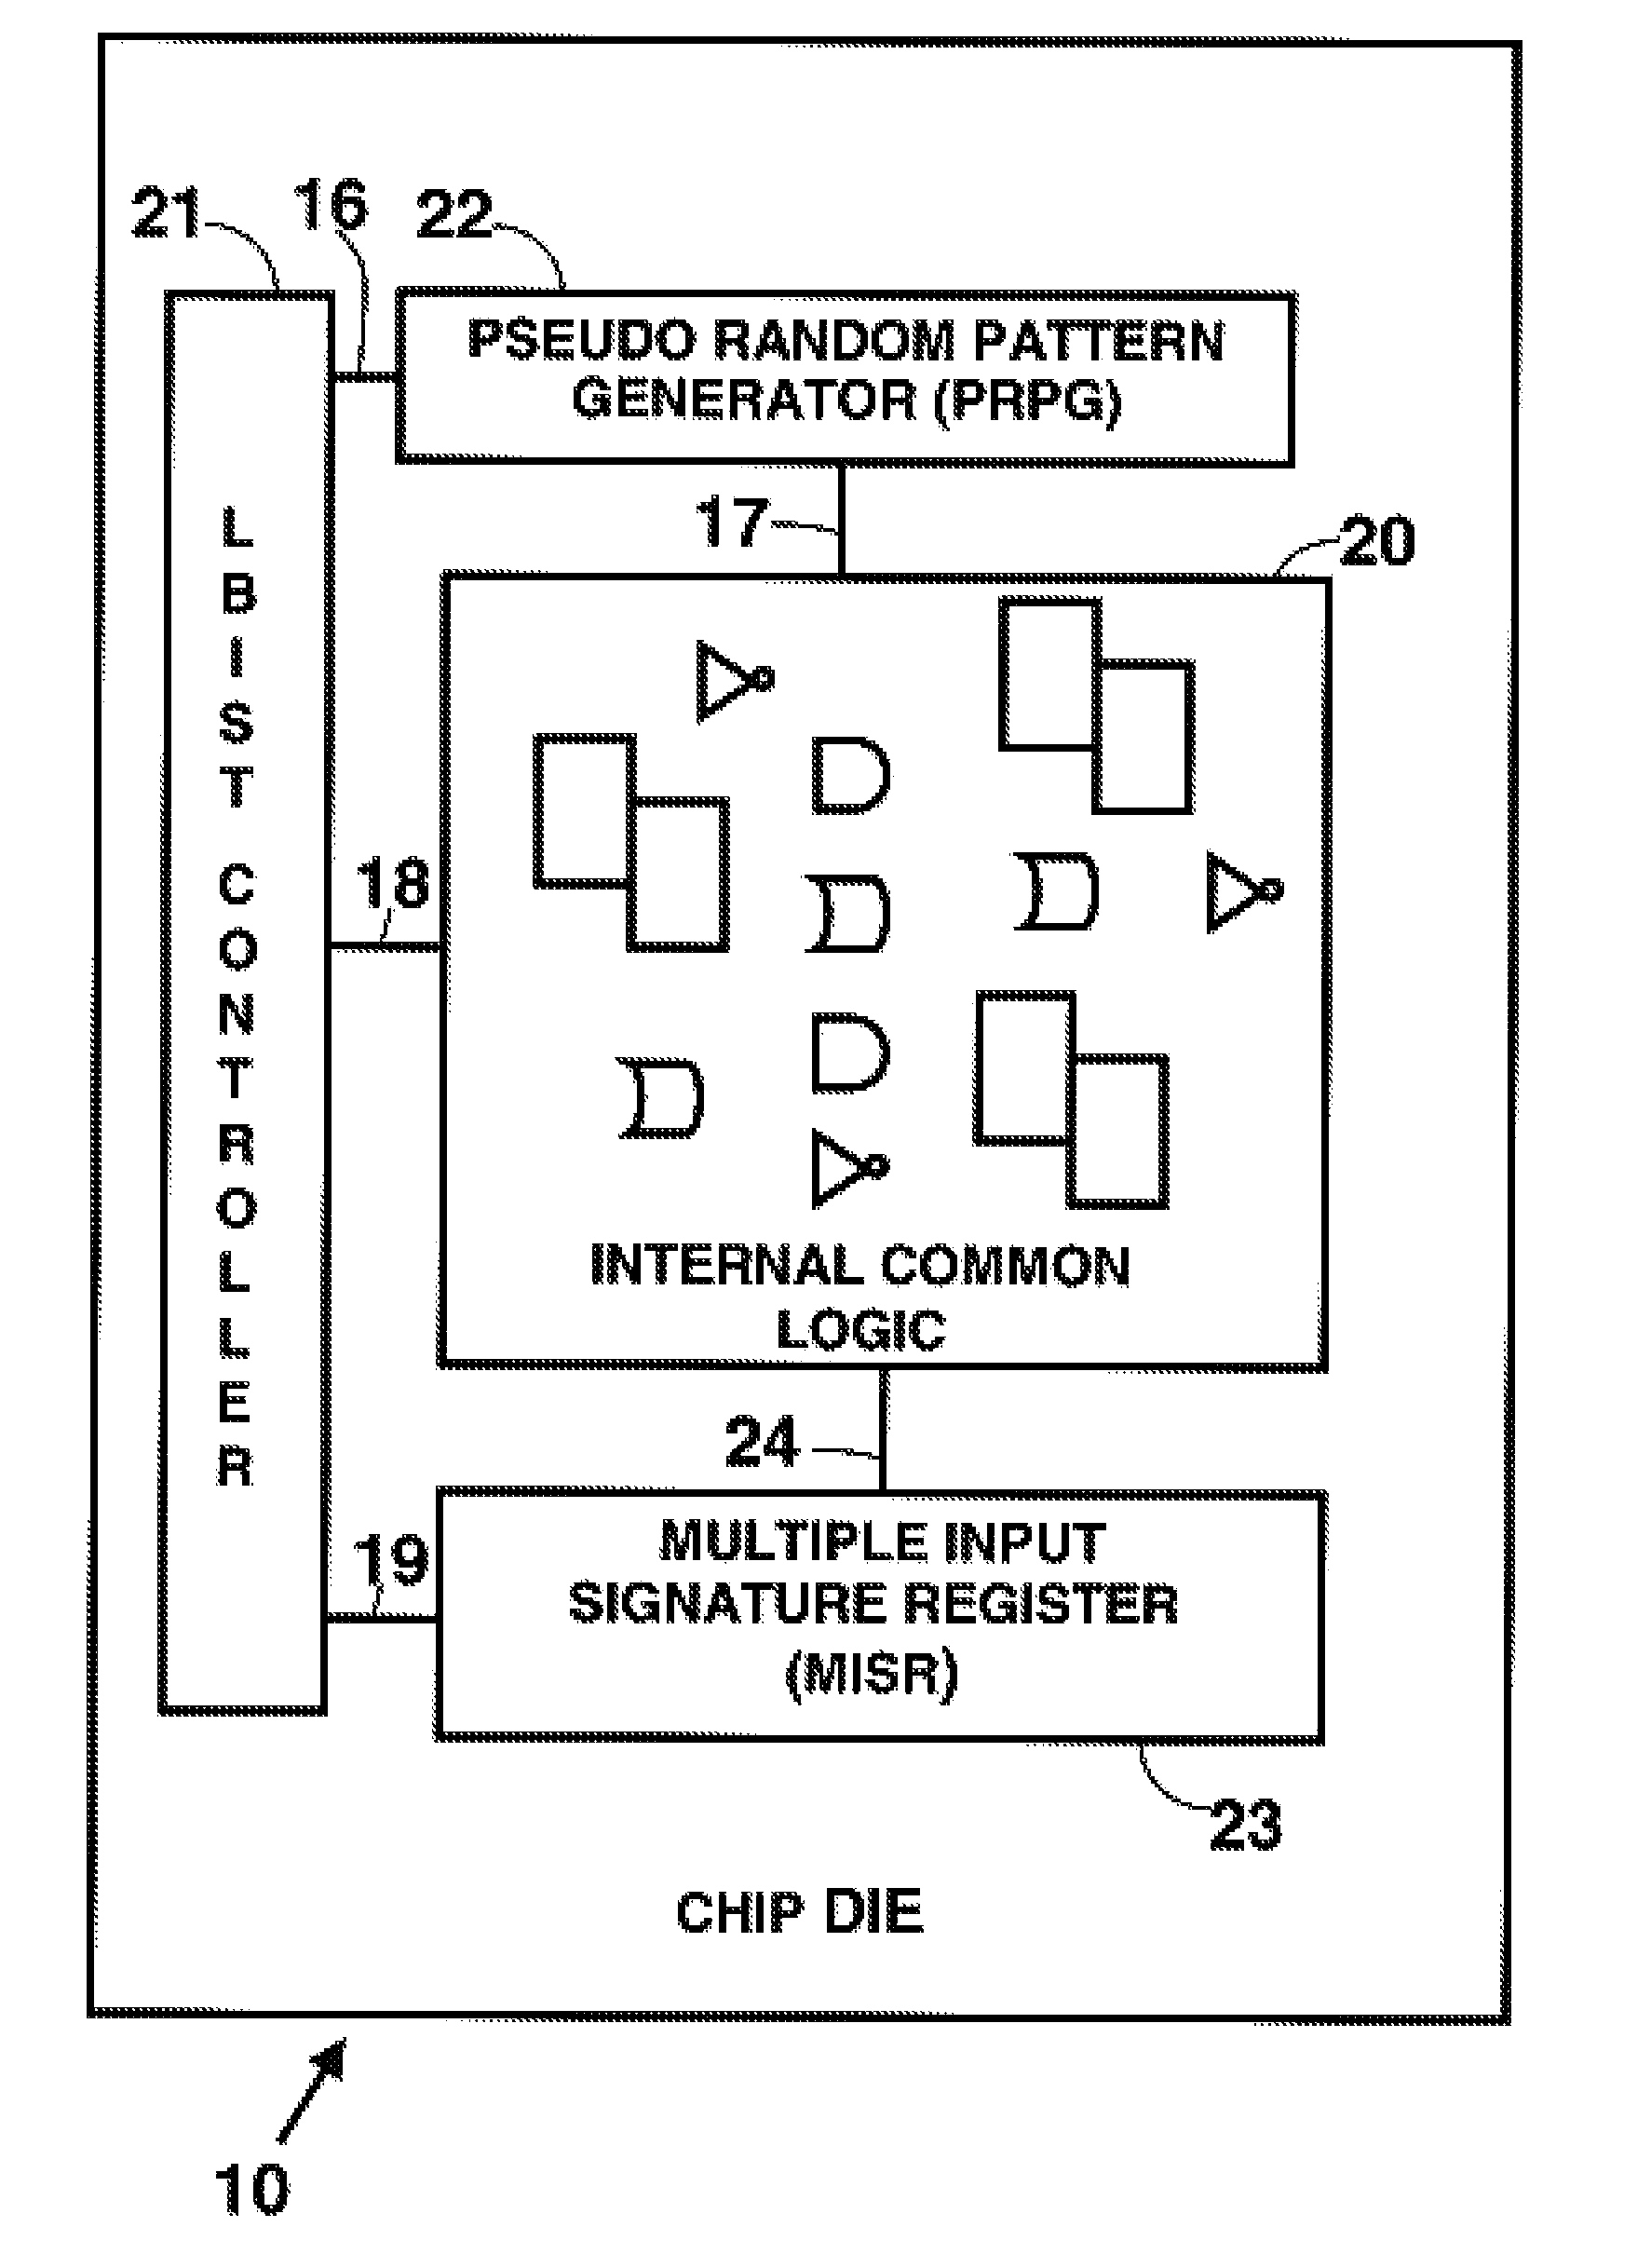 Method and System for Formal Verification of Partial Good Self Test Fencing Structures